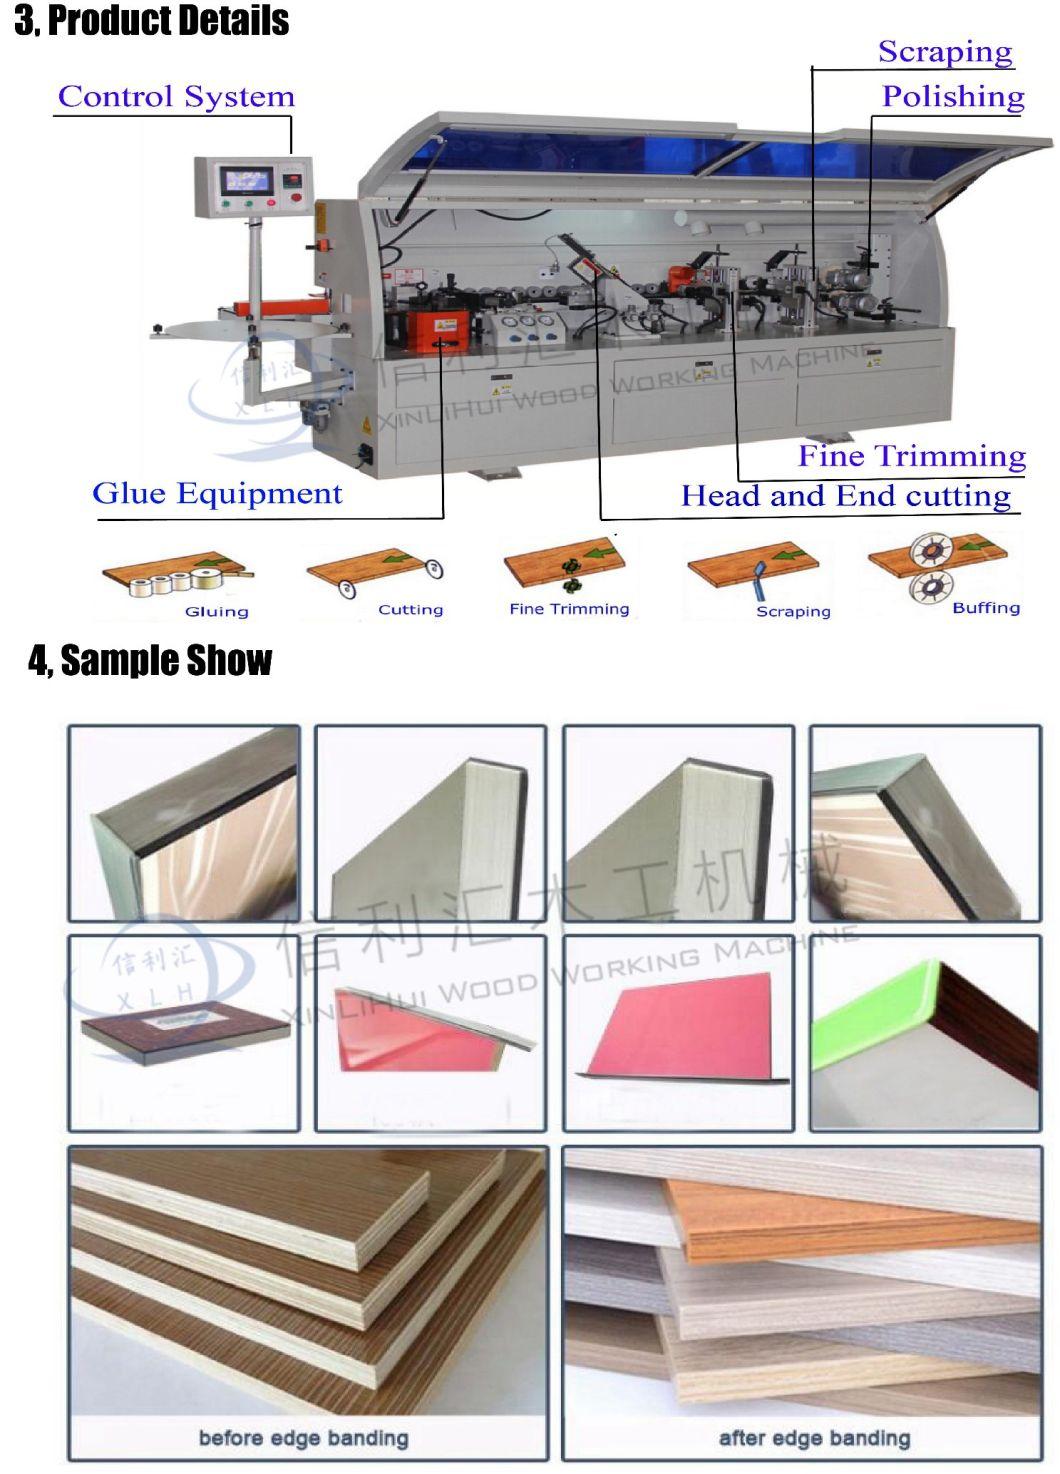 Edge Glued Wood Panel Side Banding Woodworking Machine/ Woodworking Banding Middle Grade with Low Price